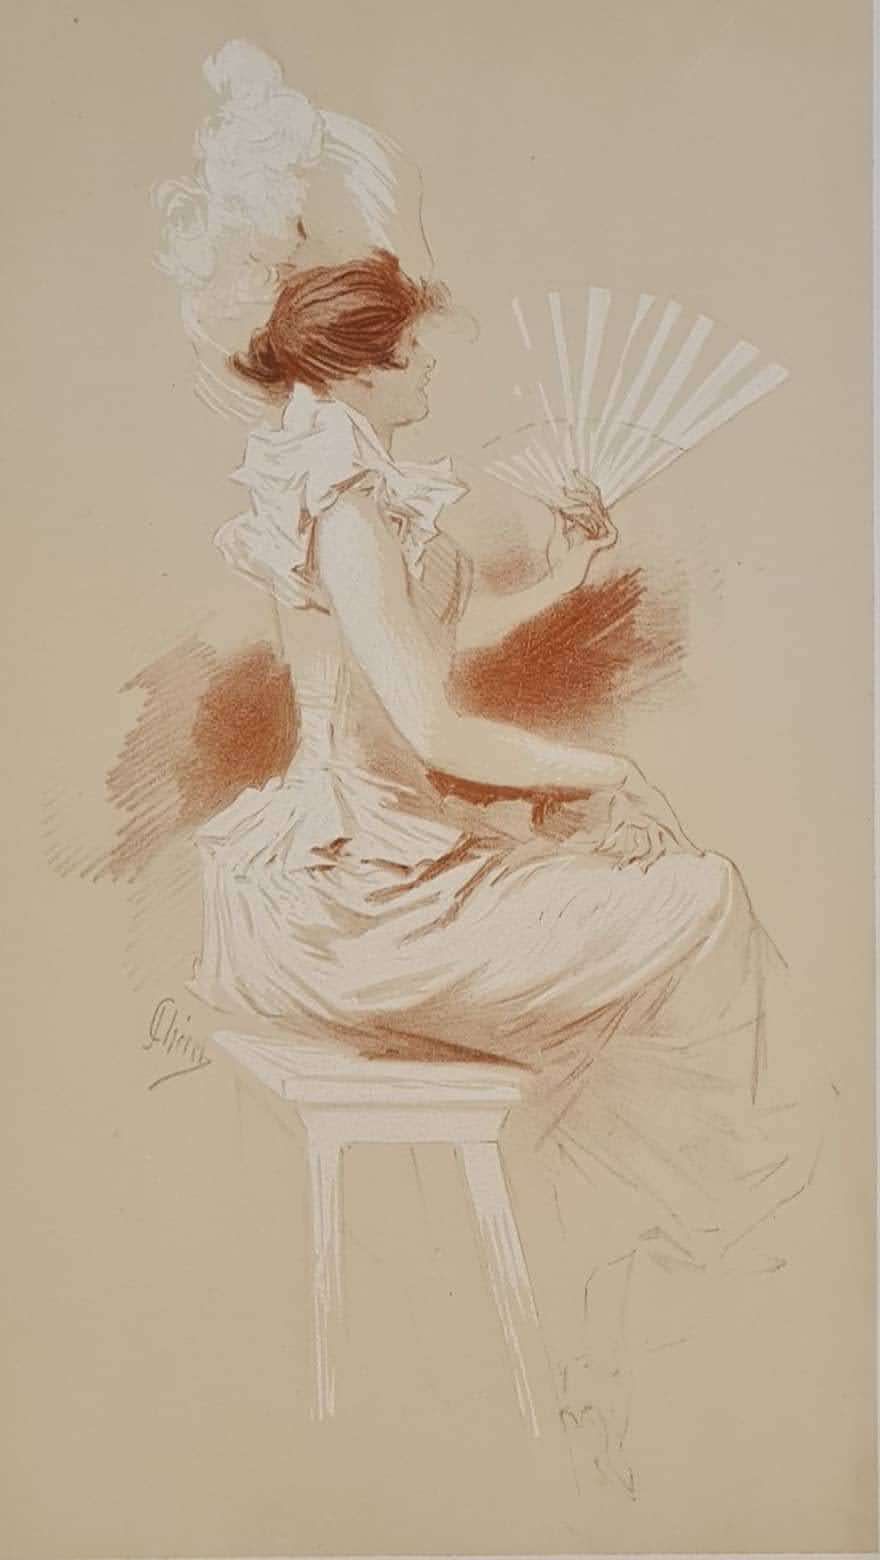 Null CHERET Jules, after

Woman with a fan

Lithograph, signed lower left in the&hellip;